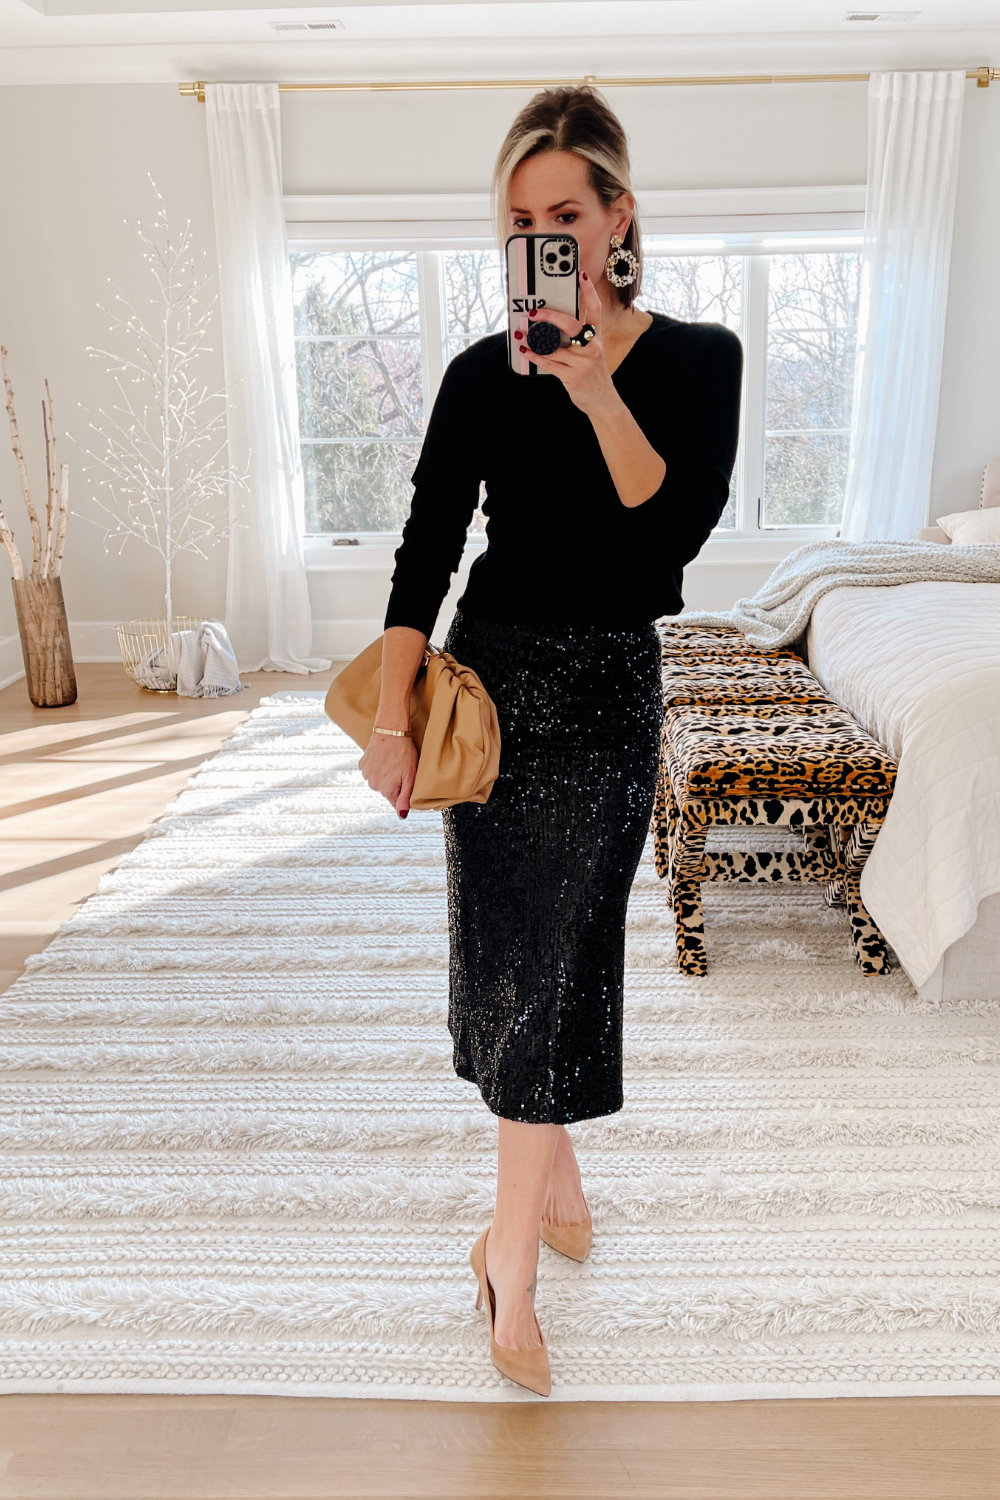 Suzanne wearing a black top, sparkly pencil skirt, nude heels and a nude clutch